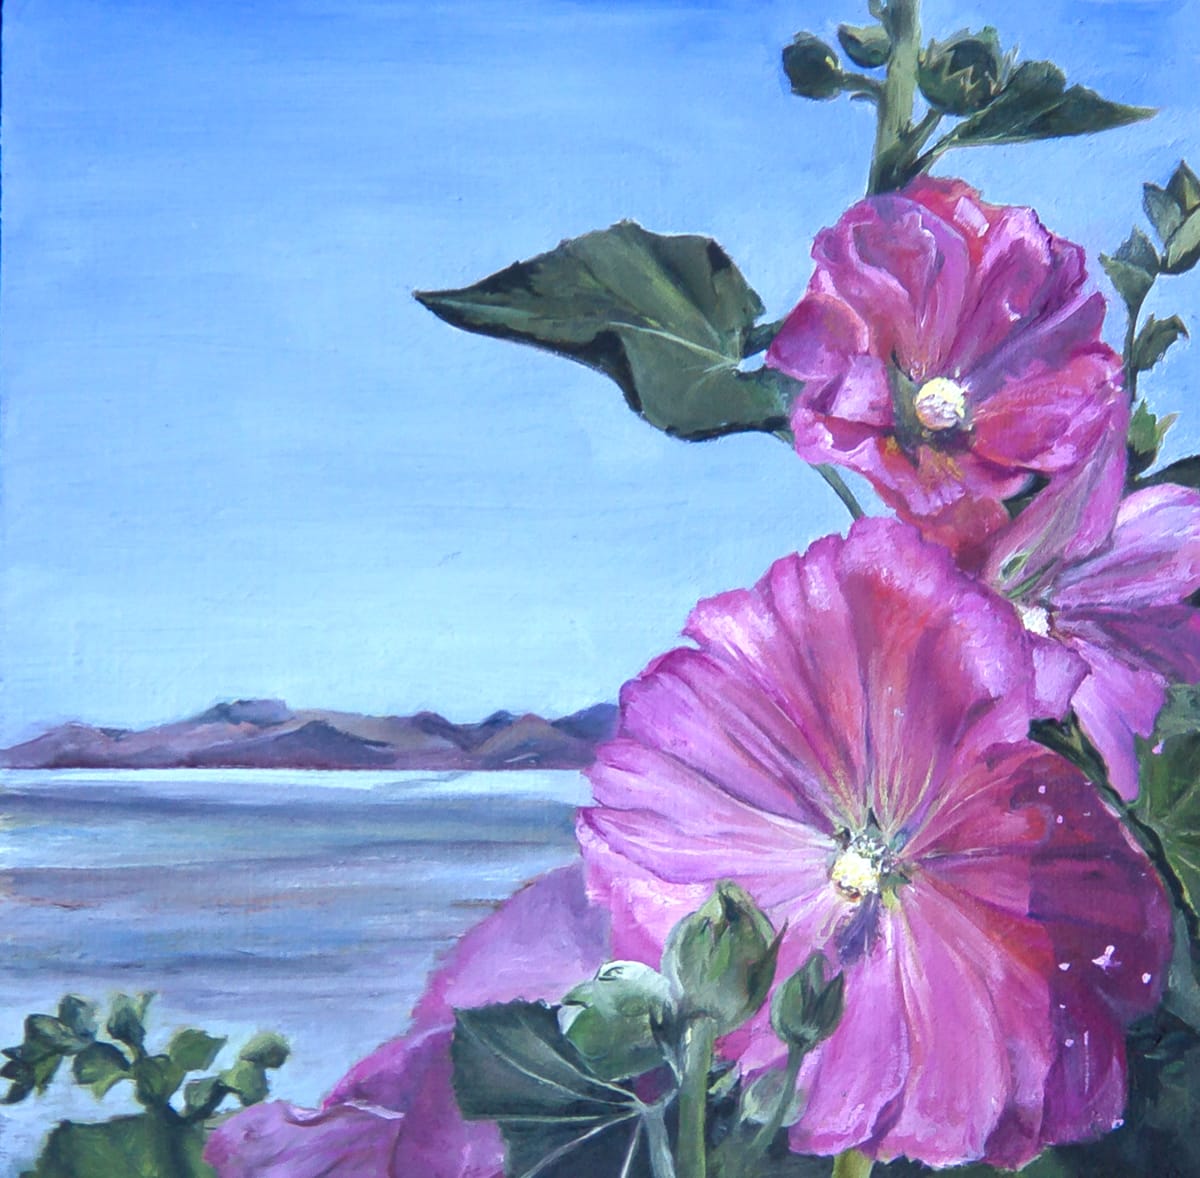 View of the Great Salt Lake by Nila Jane Autry  Image: I grow Hollyhocks. Lots of them. And I live by the Great Salt Lake on the south edge. So I combined the two iconic images into this little piece. Flowers in a Landscape.